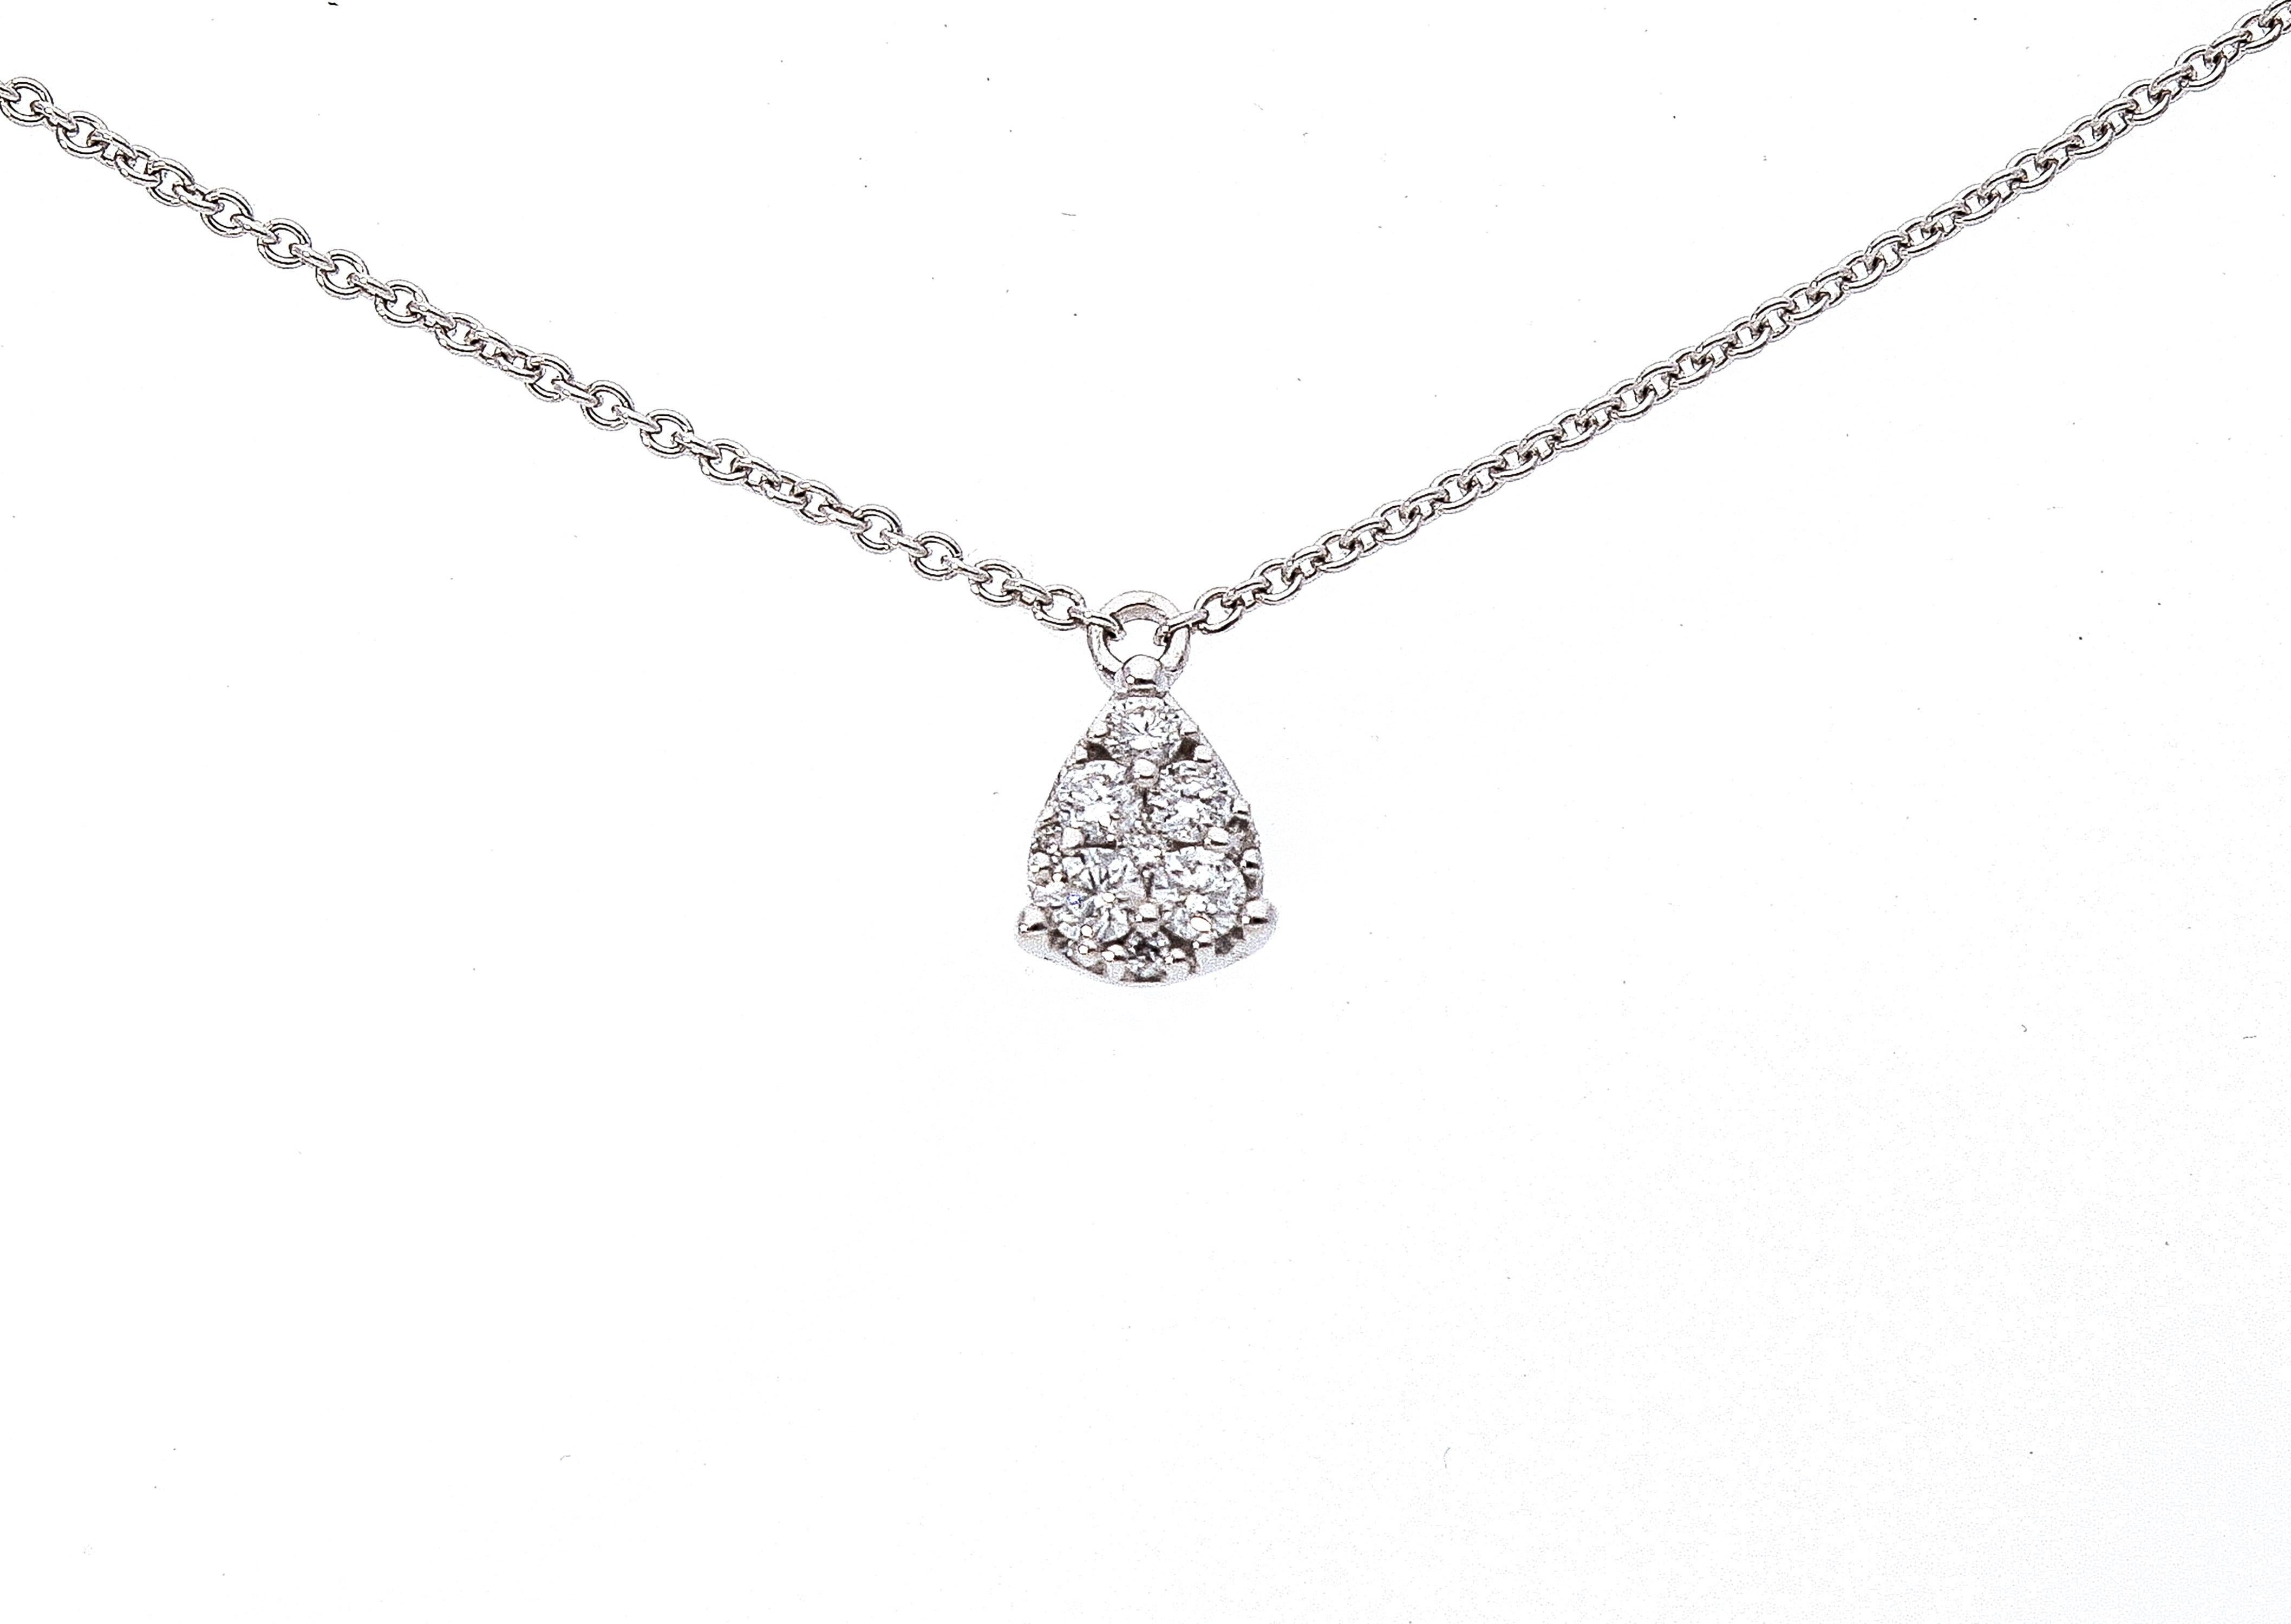 18 Karat White Gold Chain Necklace with Five Drop Pendant with Diamonds For Sale 3